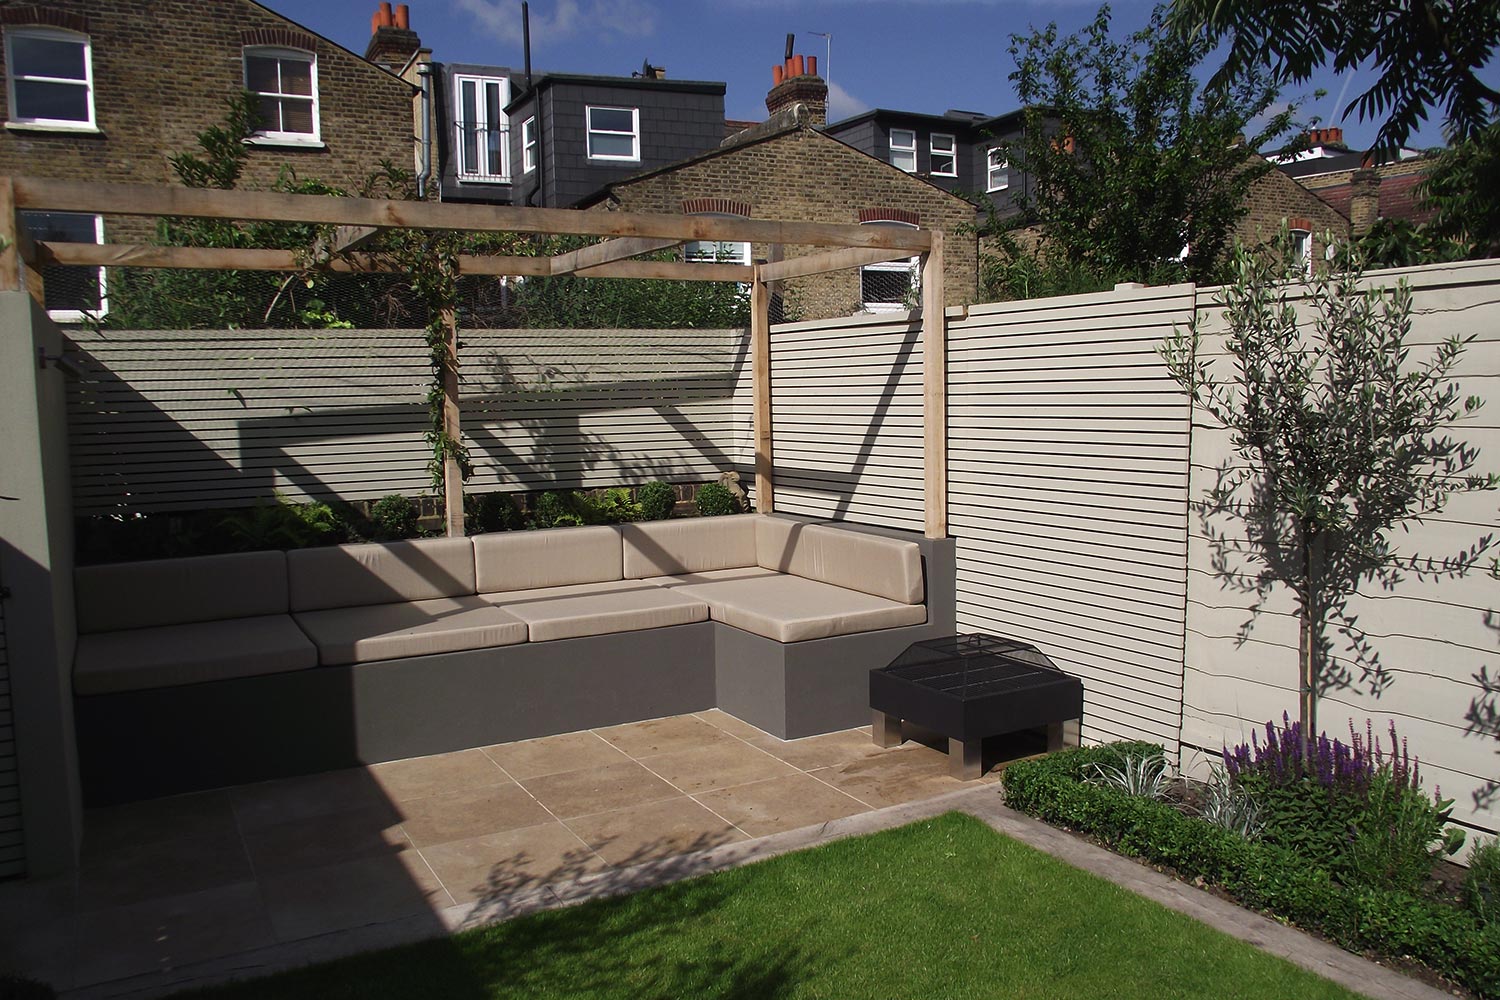   Clapham South   Modern Garden for Young Couple with Newborn 